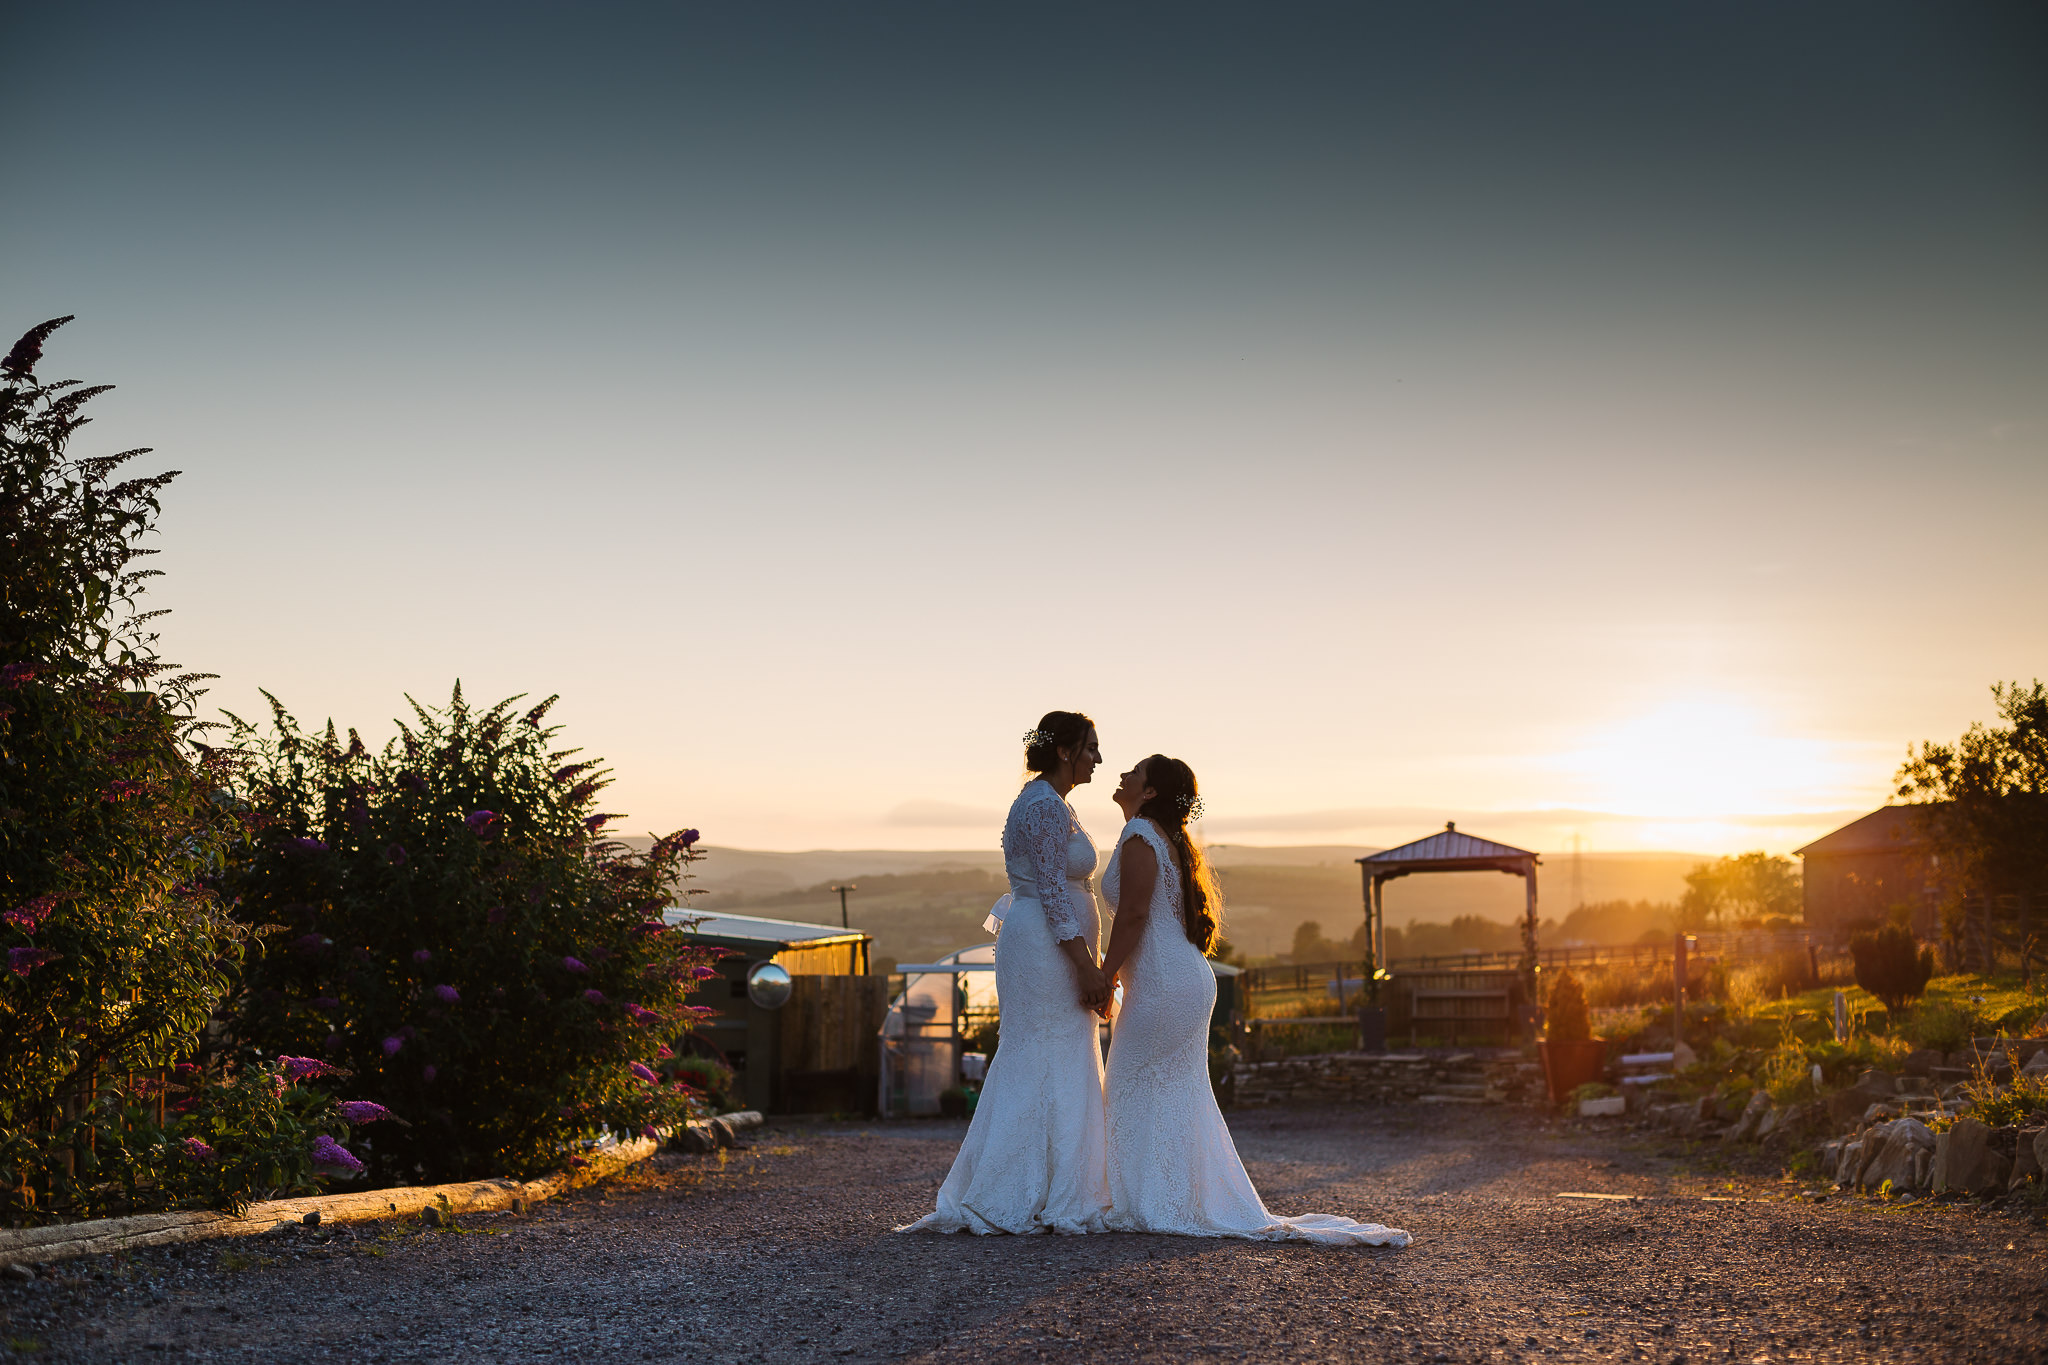 Two brides enjoy sunset at the wellbeing farm same sex wedding